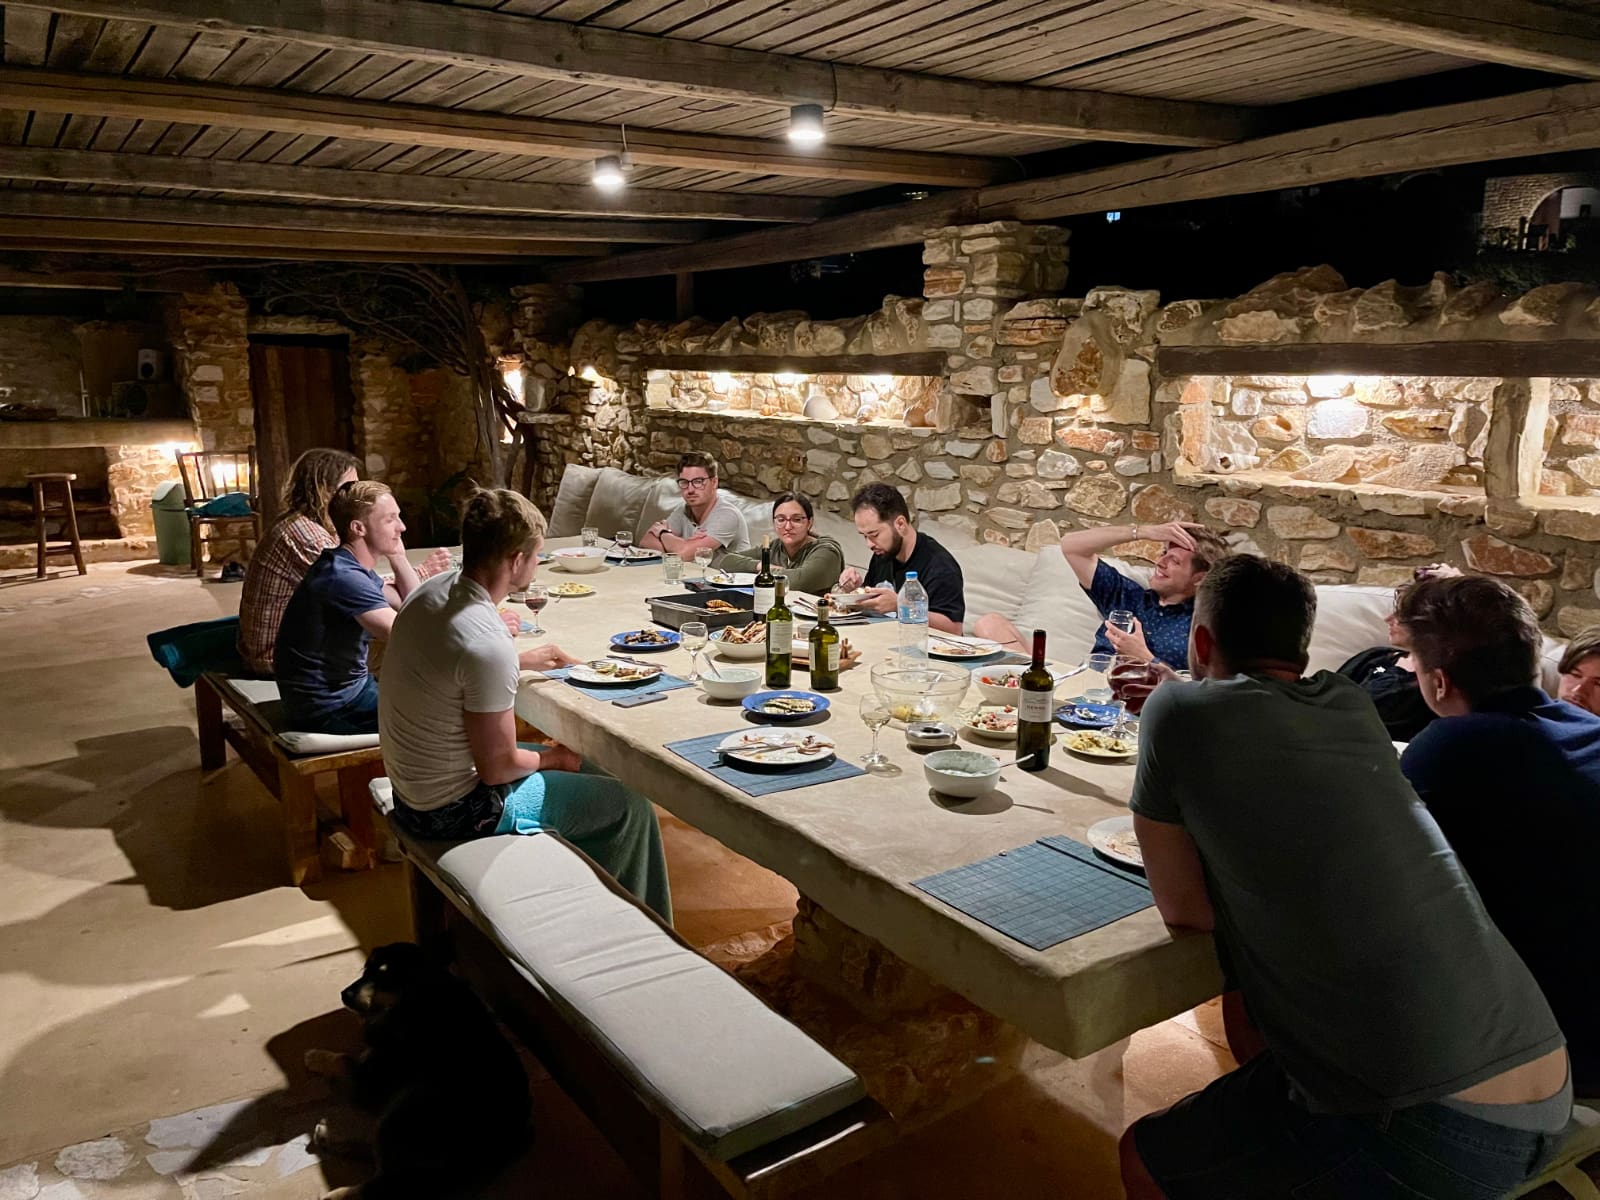 Parabol Product Members gathered for dinner in Paros Greece